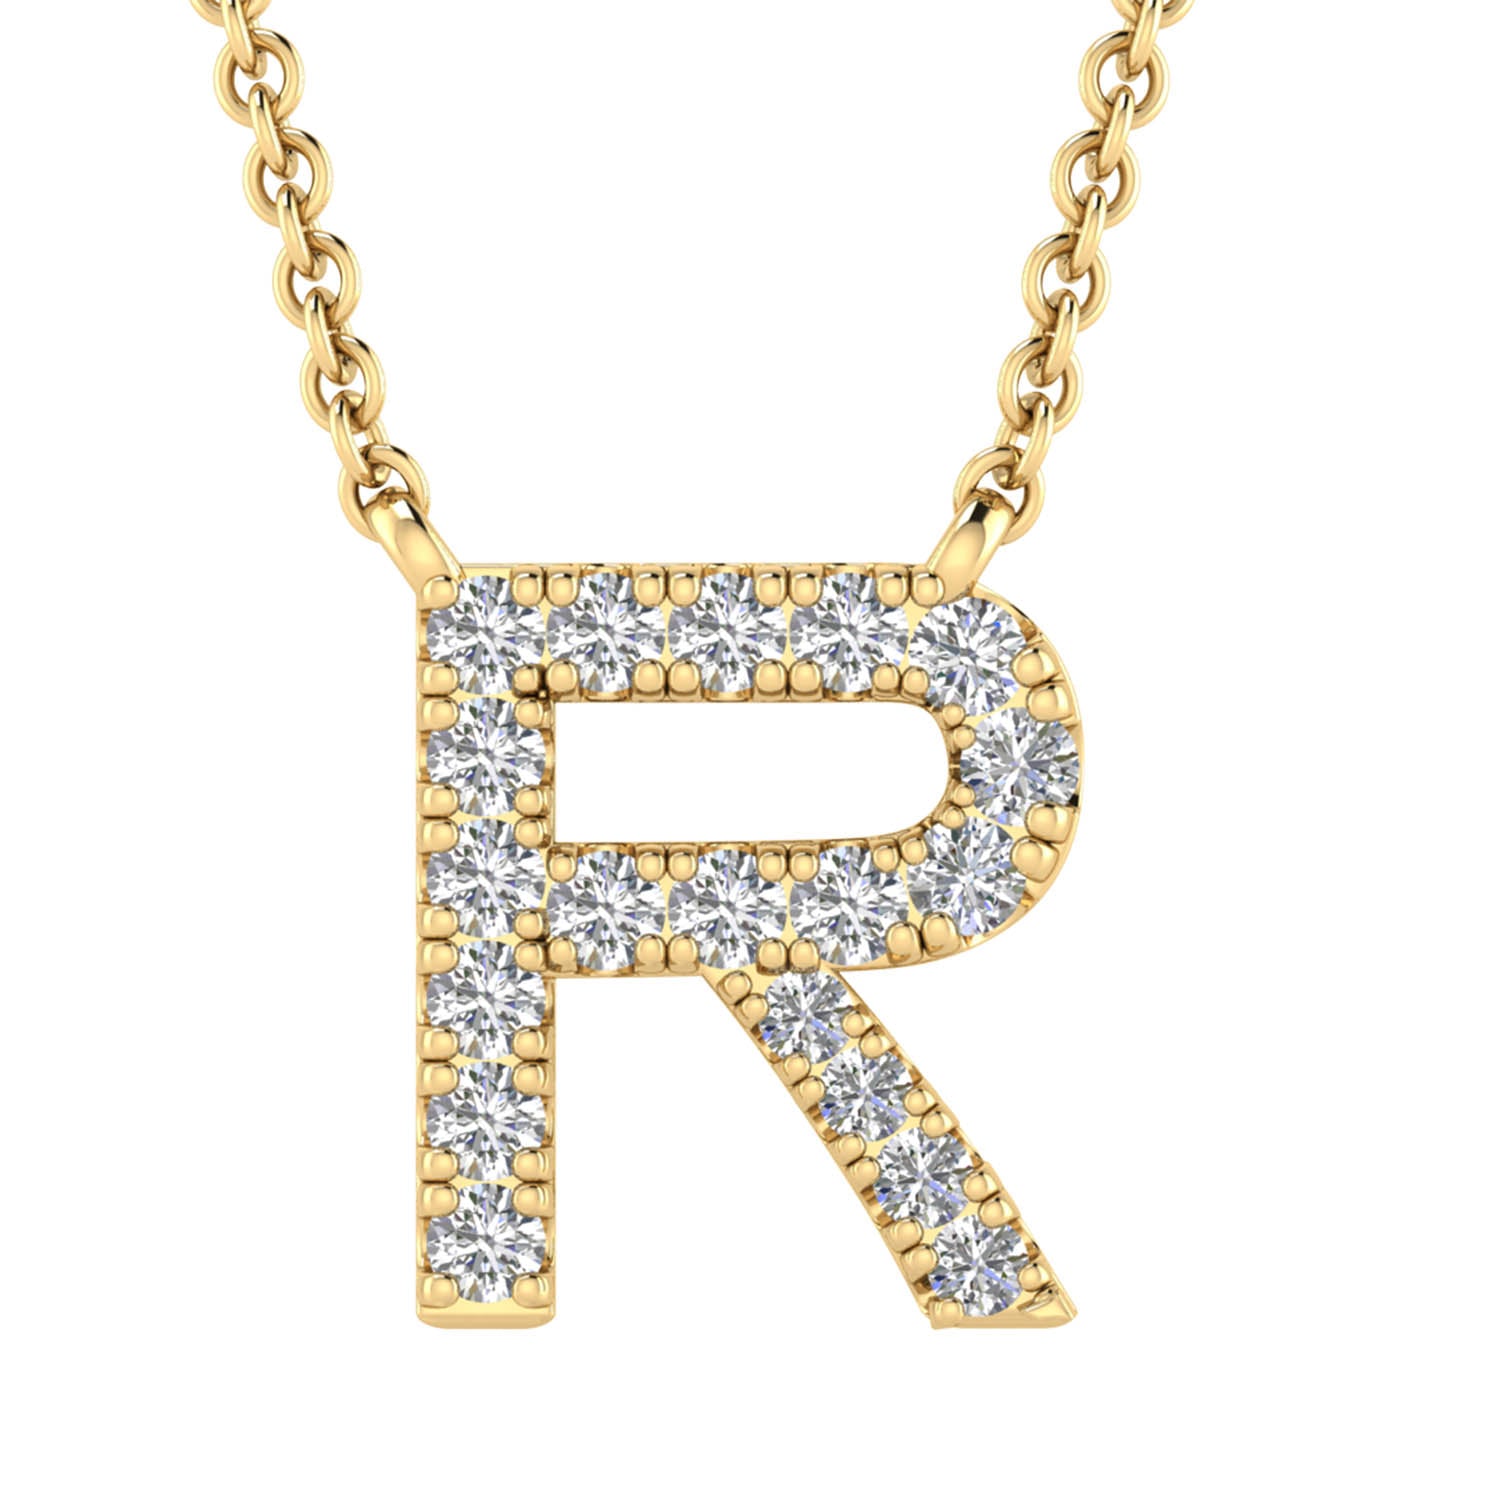 Initial 'R' Necklace wth 0.09ct Diamonds in 9K Yellow Gold - PF-6280-Y